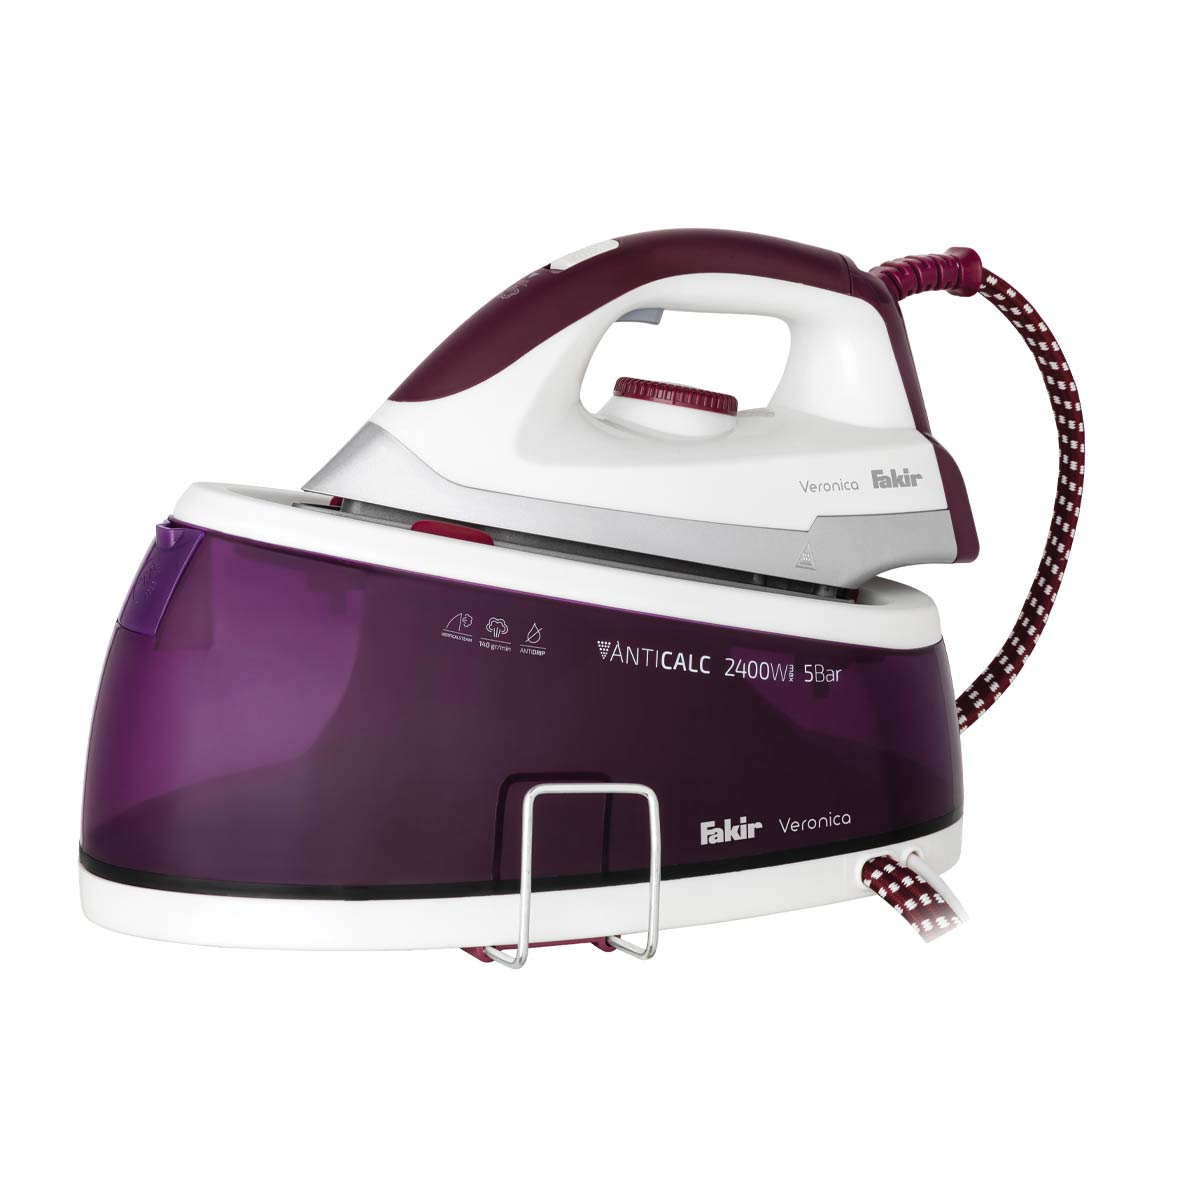 Steam generator irons review фото 33